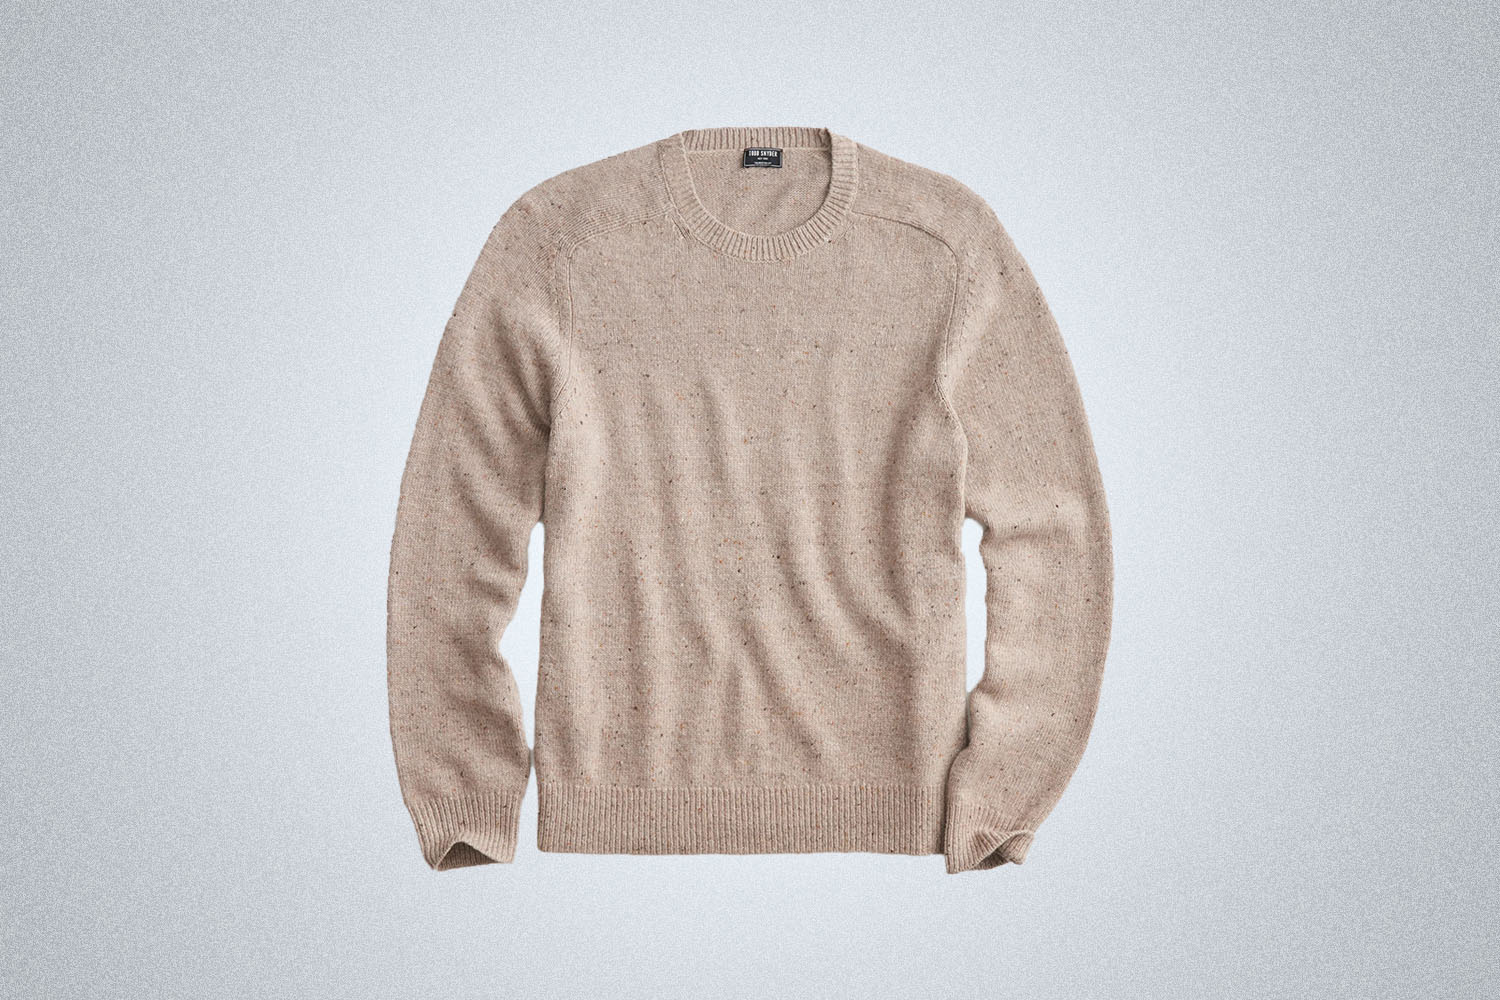 Todd Snyder Donegal Crewneck Sweater